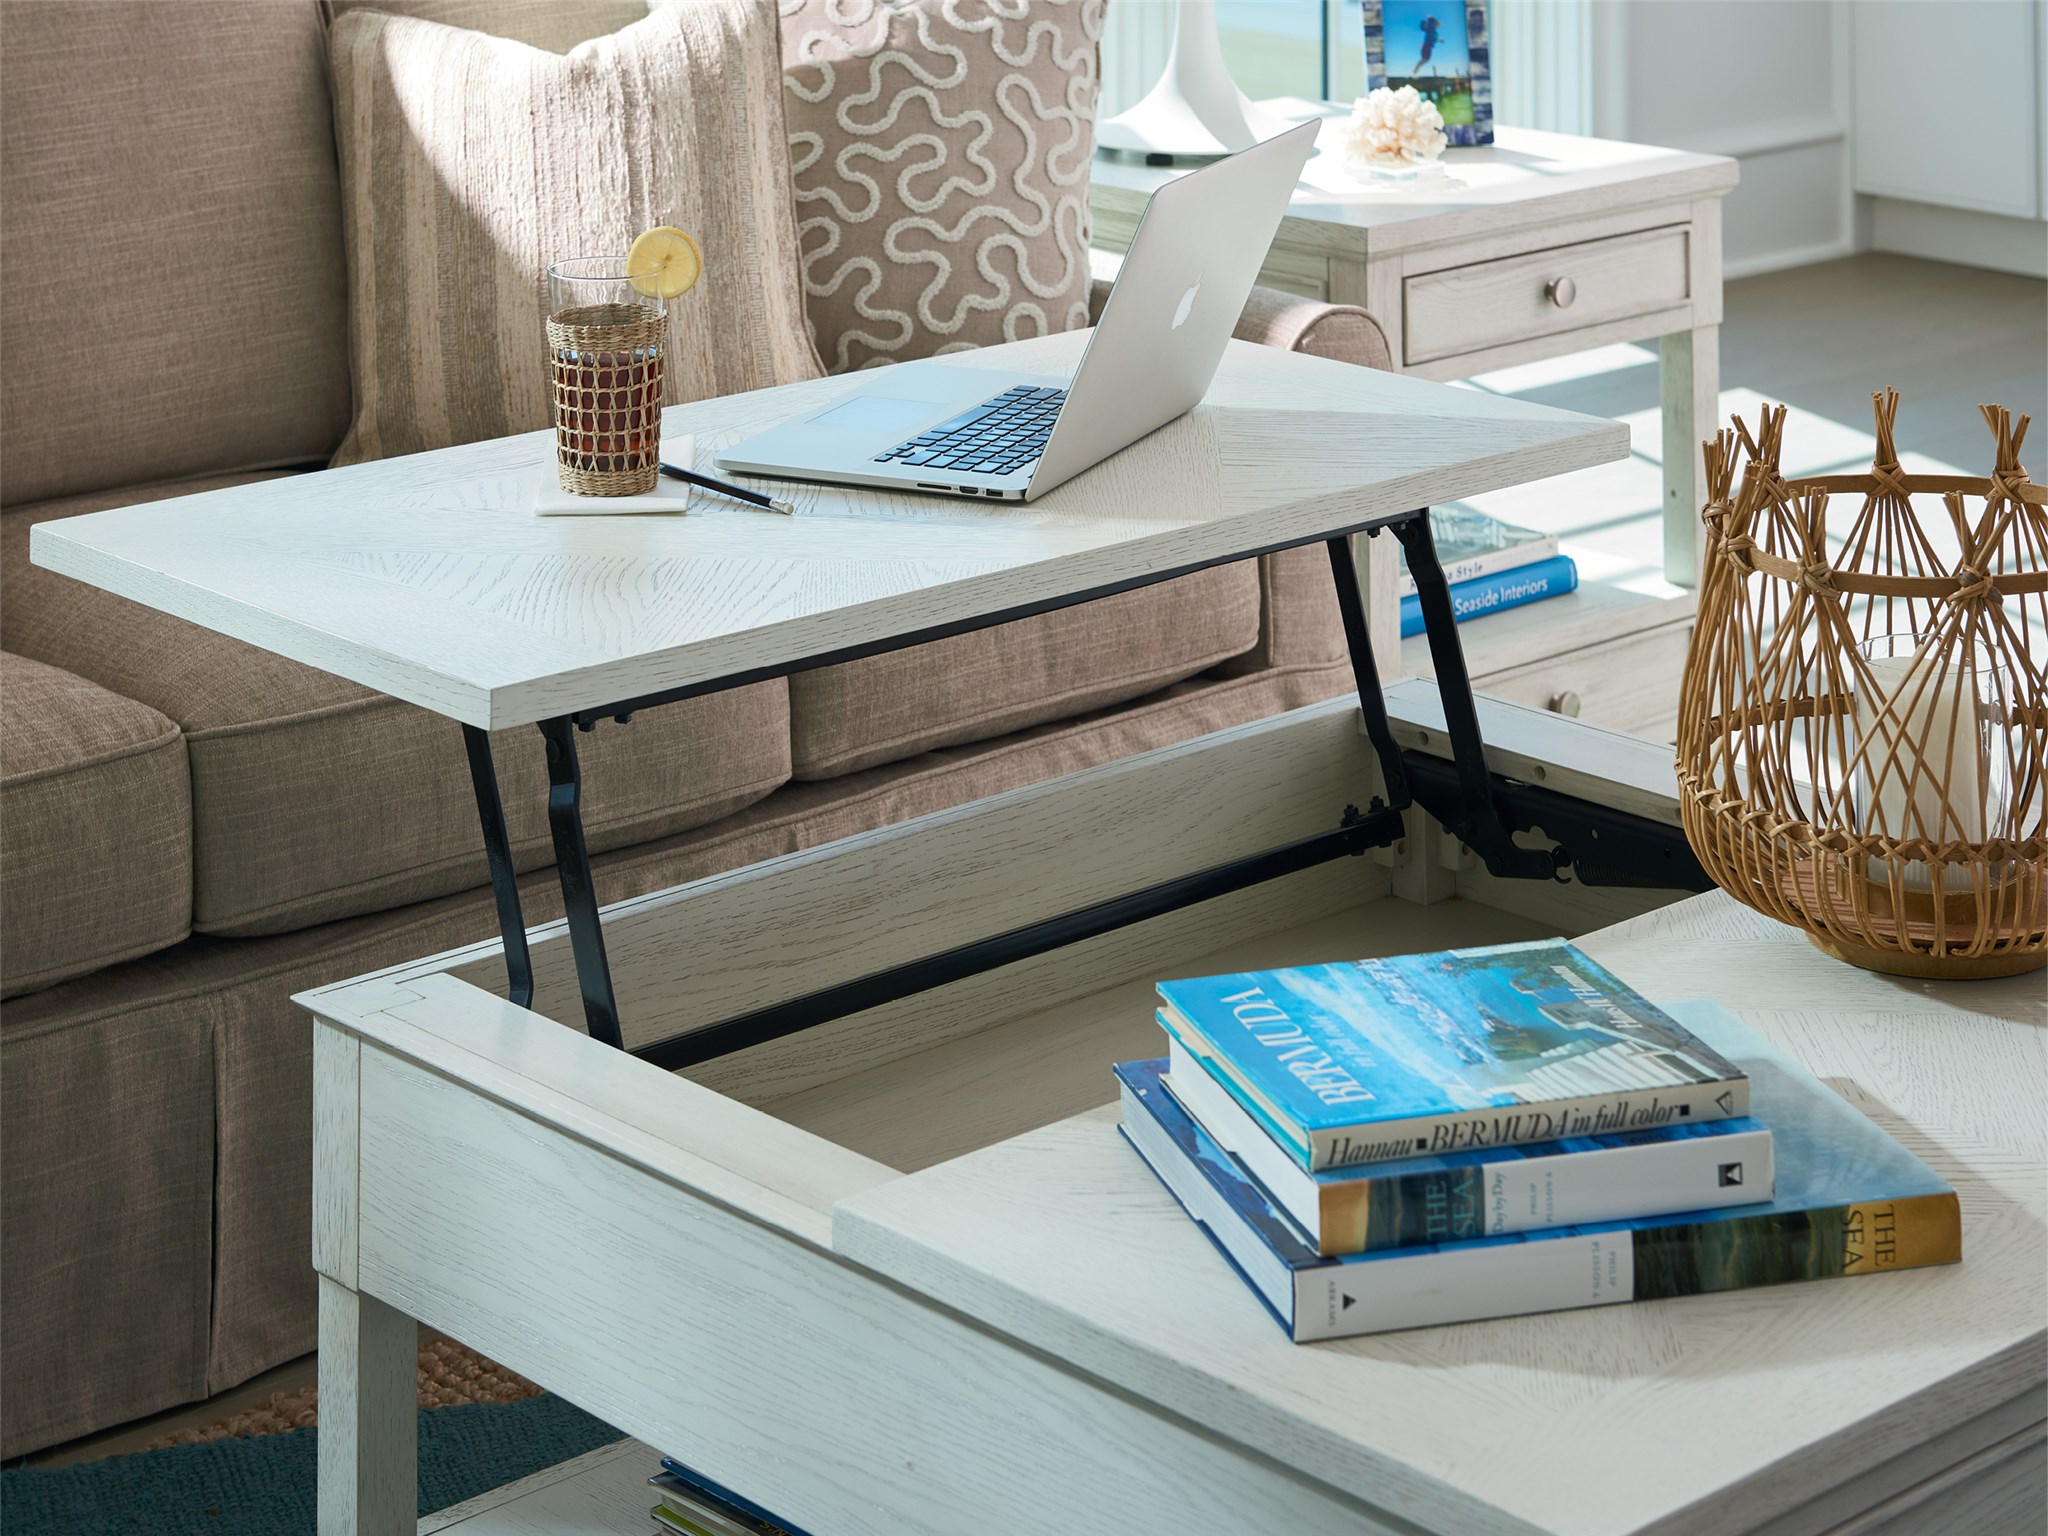 Topsail Lifttop Table